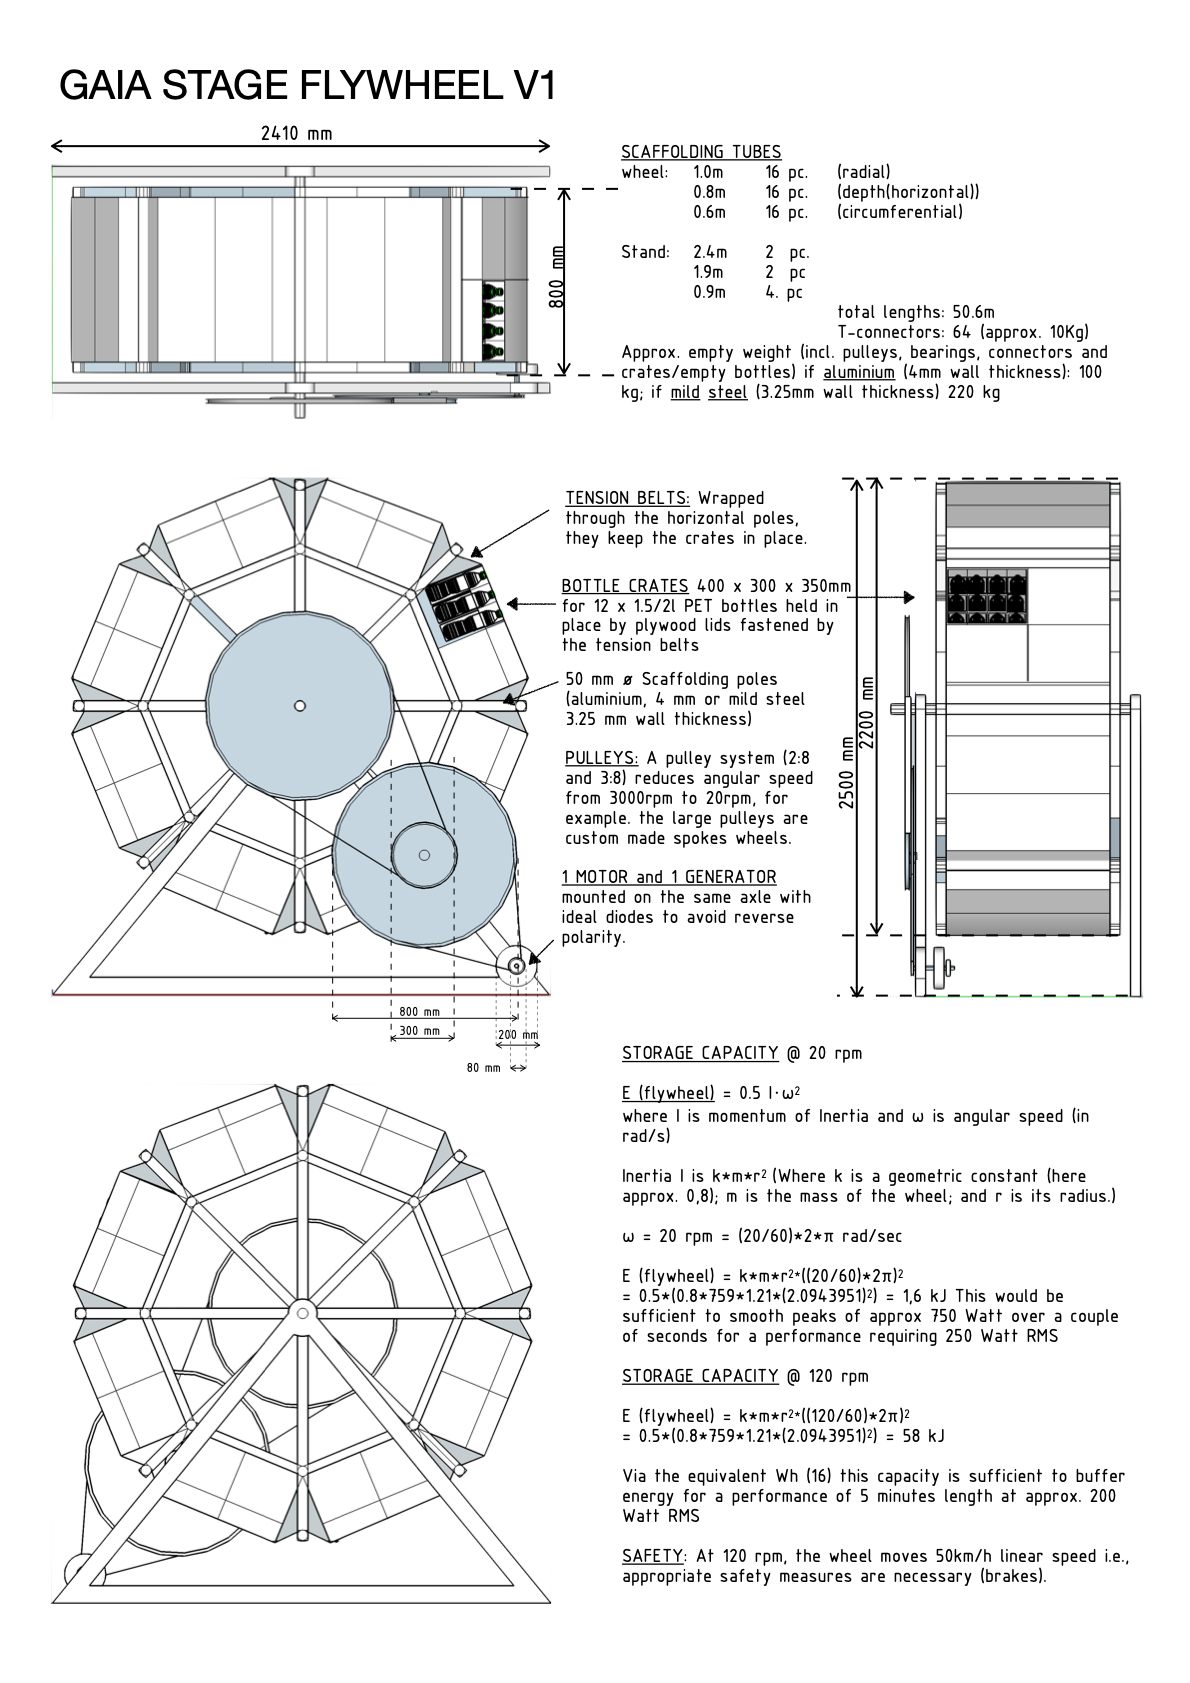 GaiaStage flywheel technical drawing with annotations